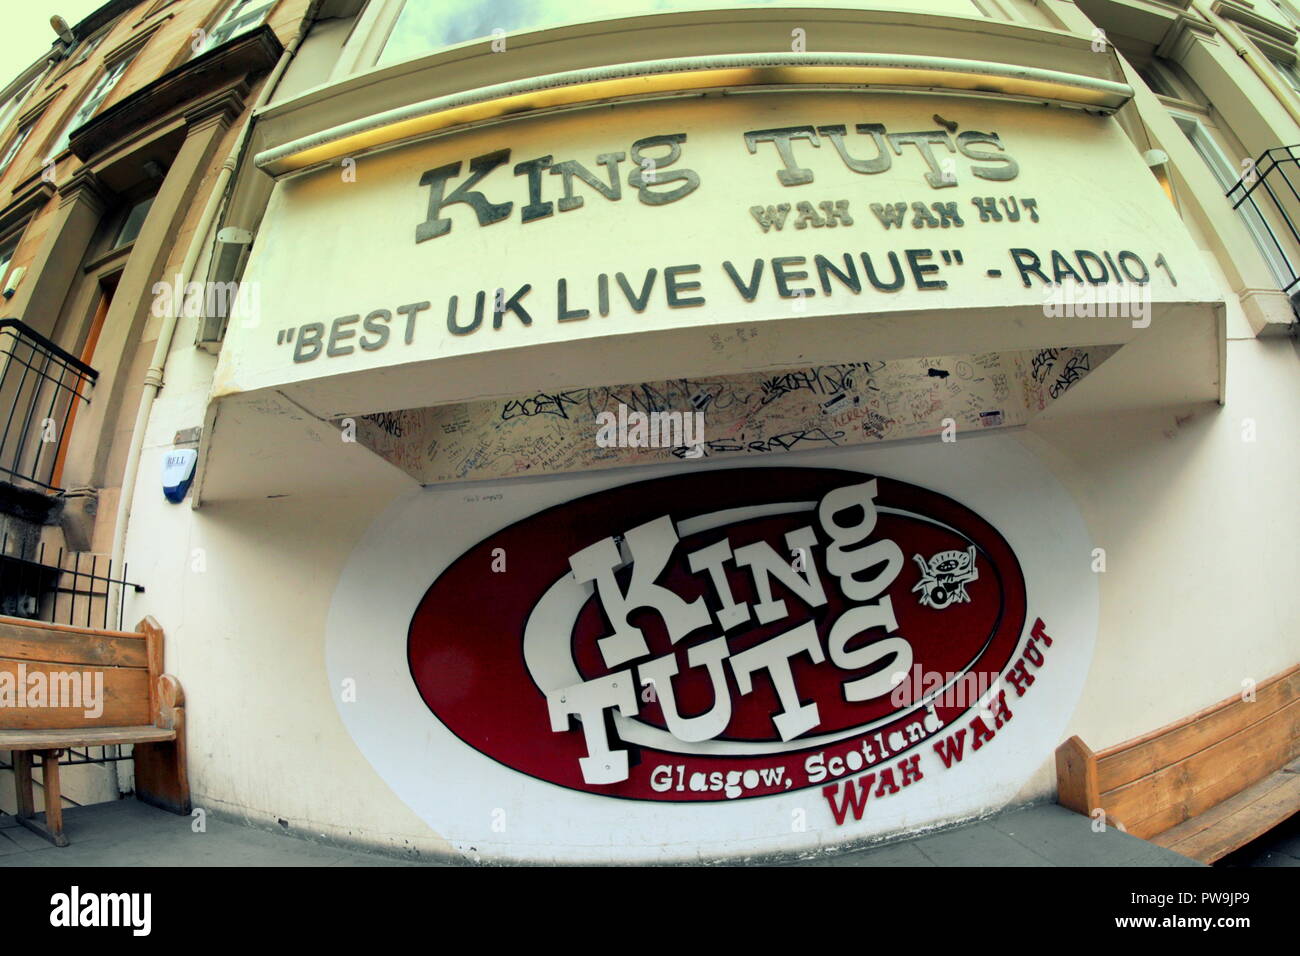 King Tut's Wah Wah Hut frontage, 272A St Vincent St, Glasgow G2 5RL Stock Photo